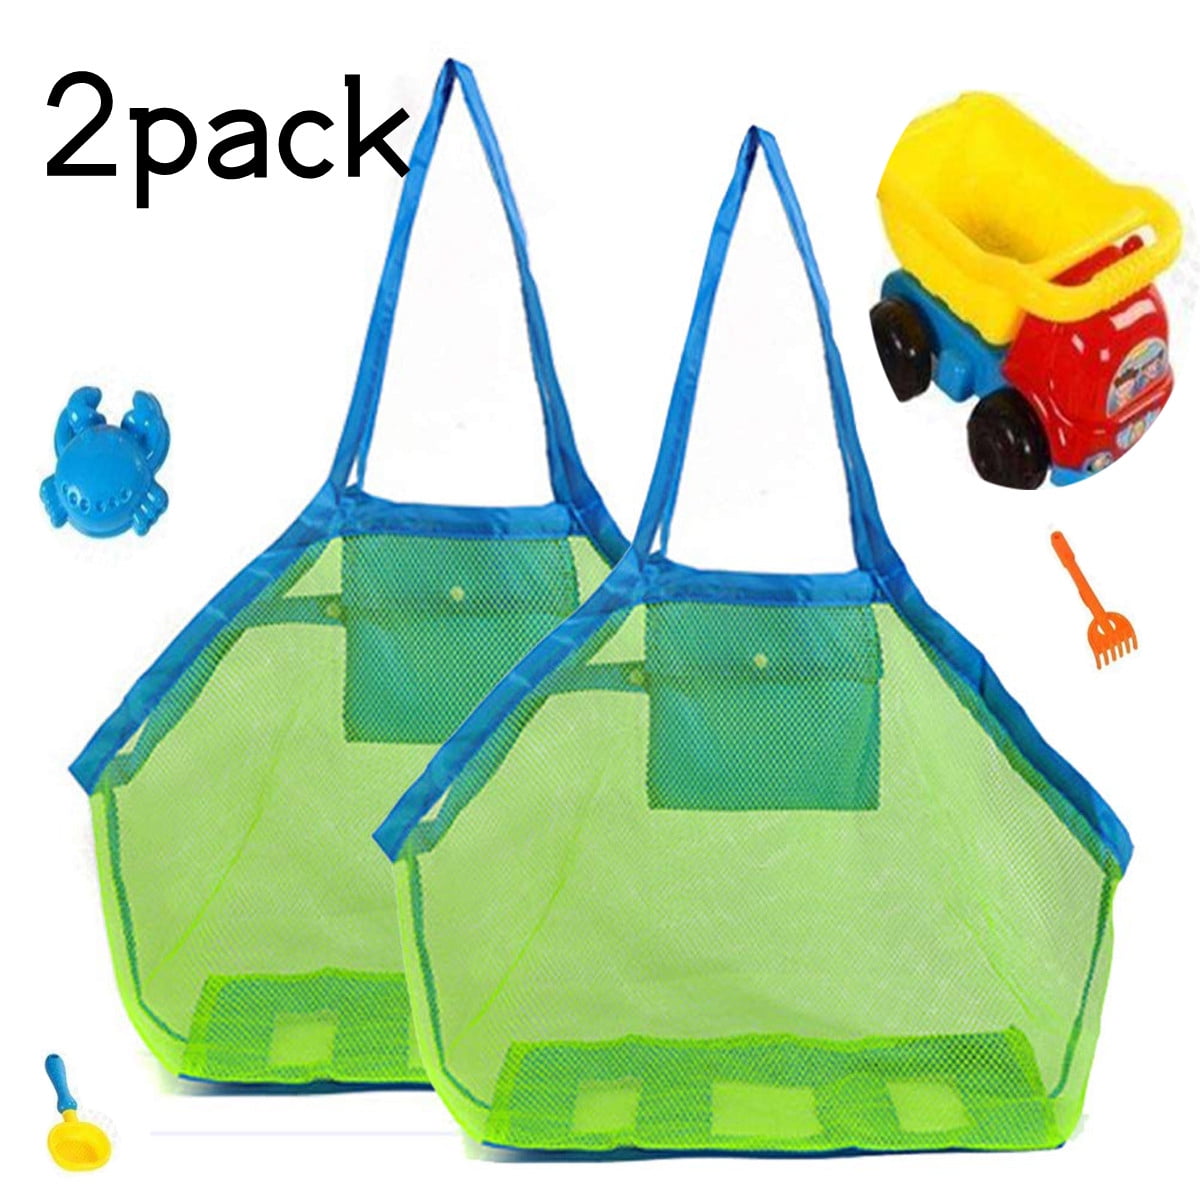 Mesh Beach Toy Bag Seashell Bag Sand Large Foldable Durable Tote Classic Swim and Pool Kids Childrens Toys Balls Drawstring Market Grocery Storage Picnic Packs Backpack Gym Travel Daily 